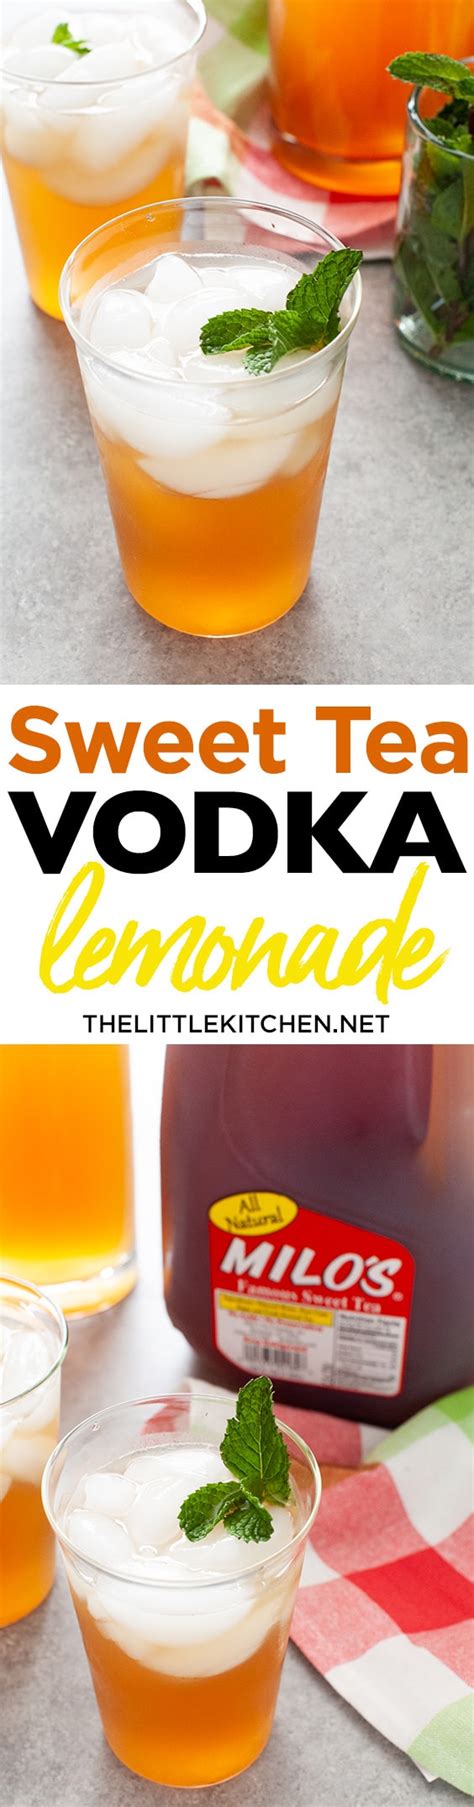 It is so easy and perfect for a party! Sweet Potato Lemonade Vodka Drink - Easy Vodka Popsicles With Lemonade My Crazy Good Life - Now ...